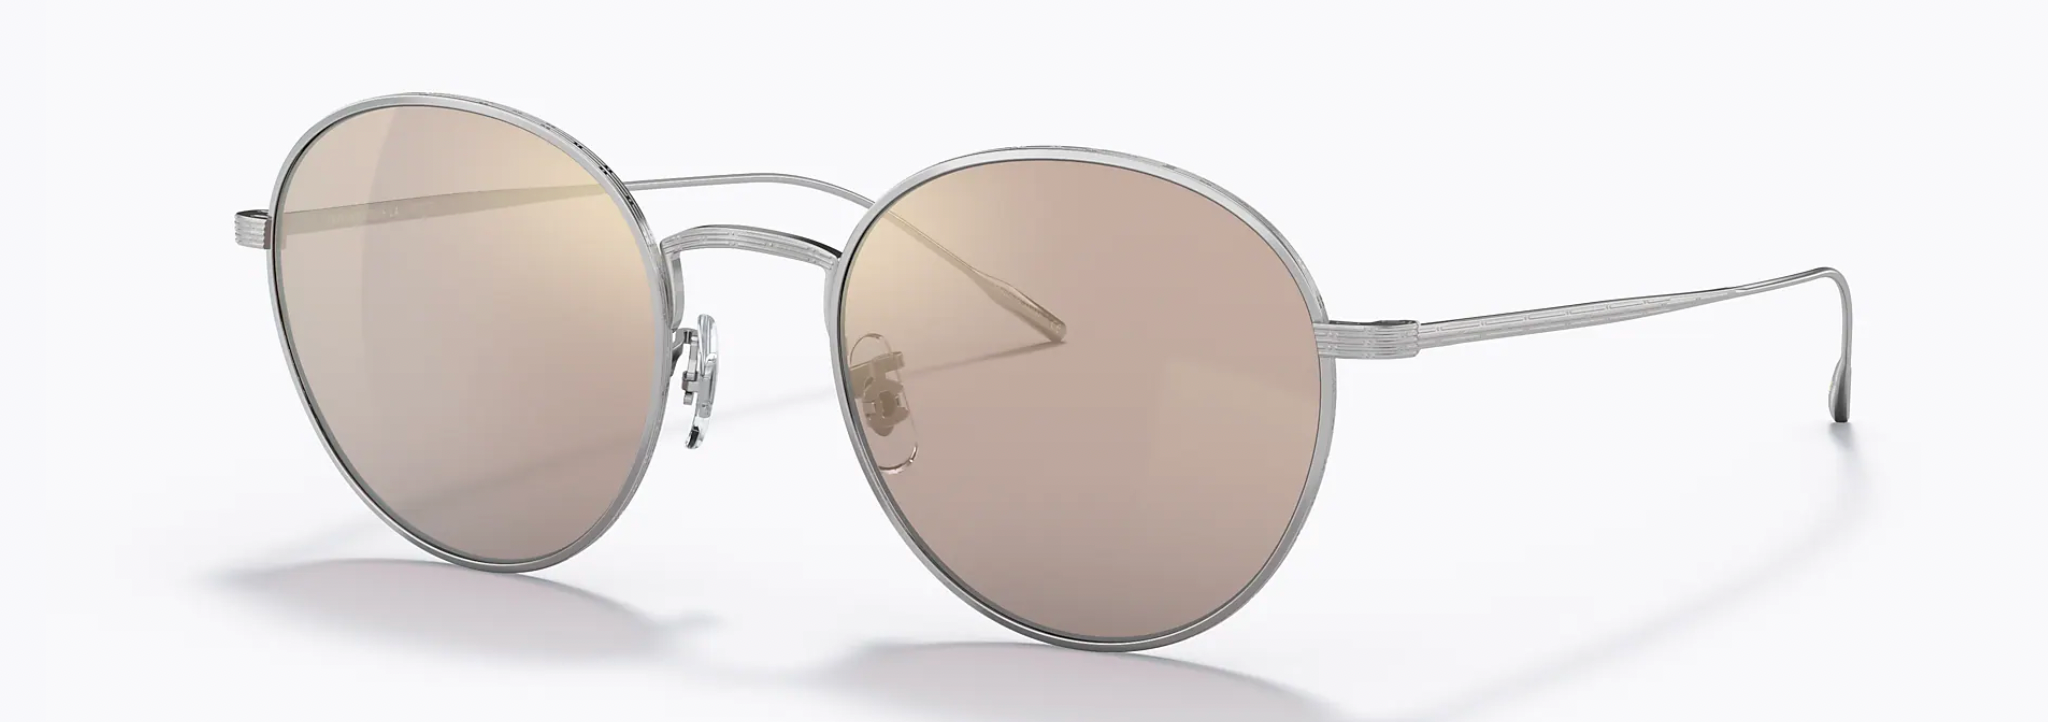 Oliver Peoples - Altair